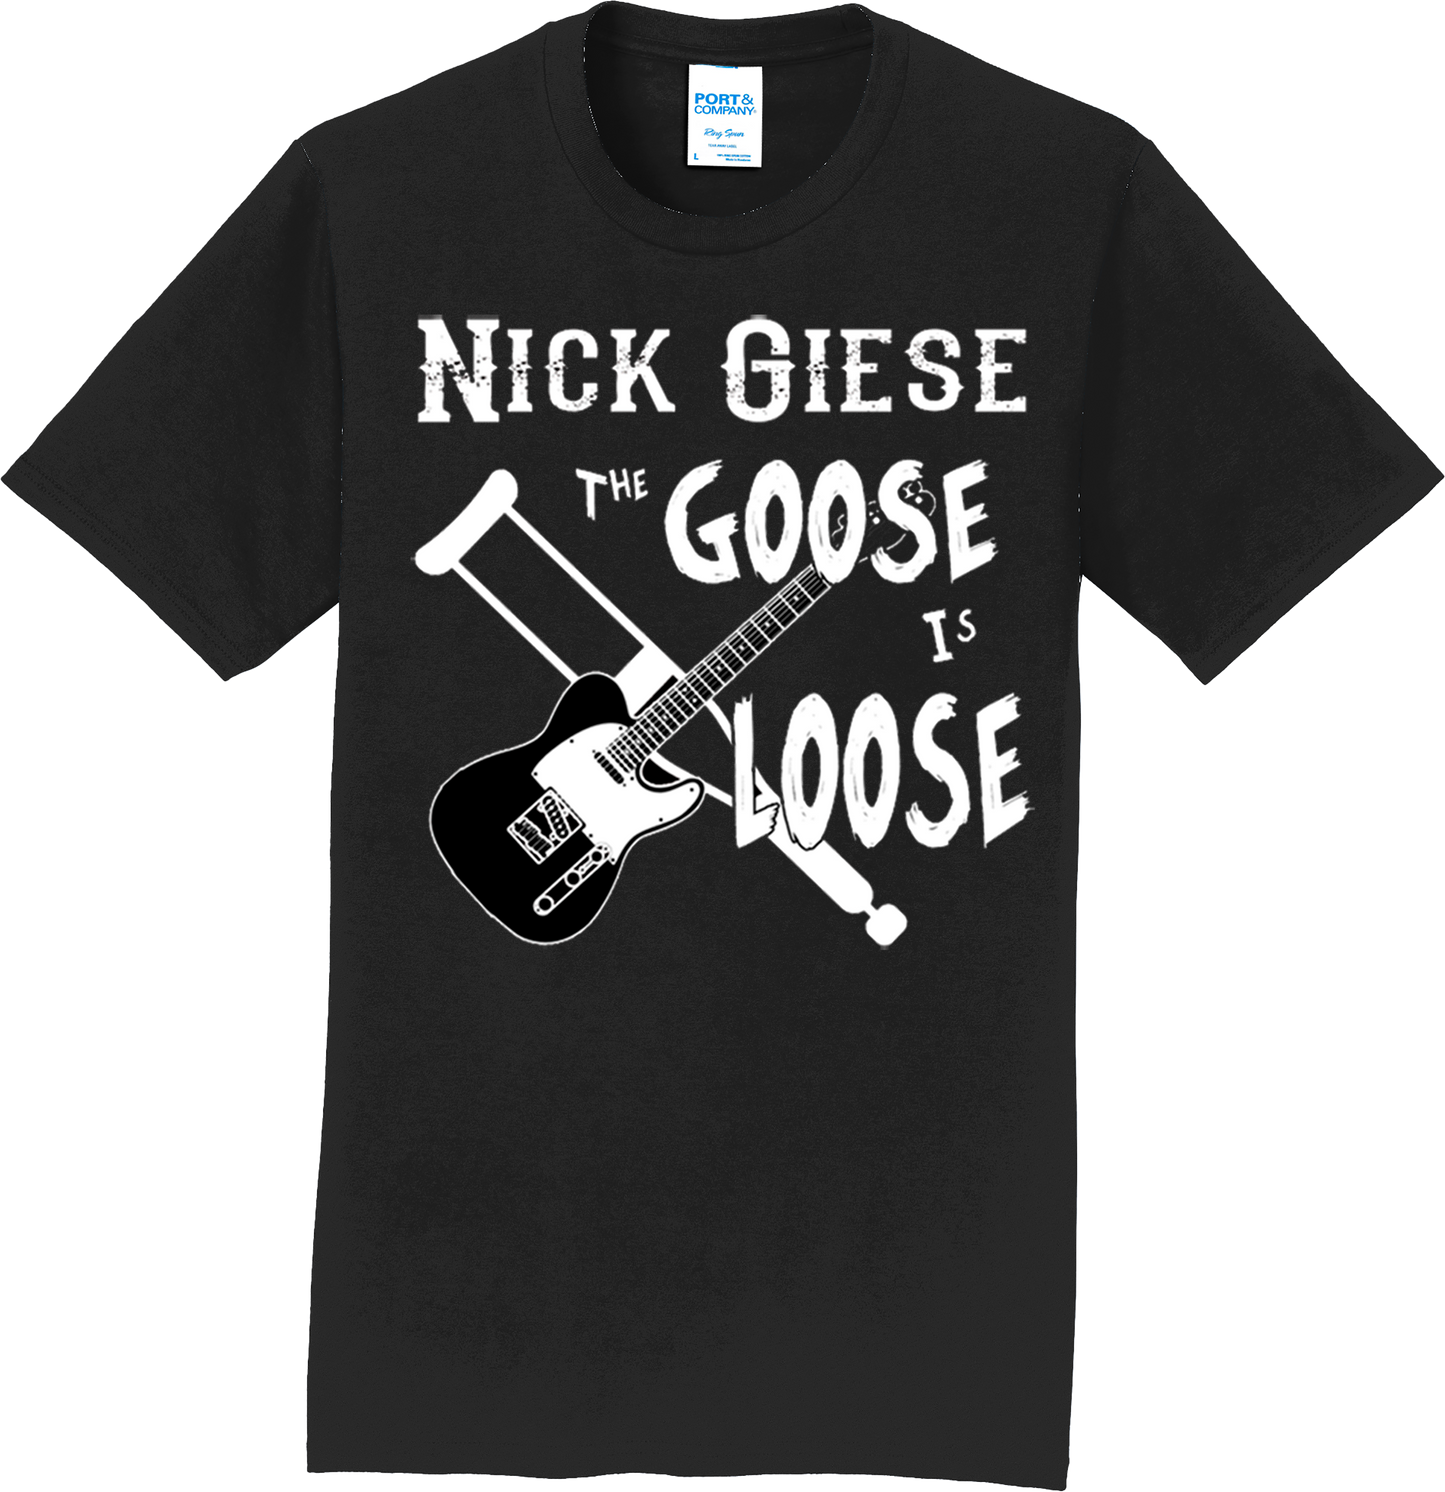 Nick Giese "The Goose is Loose"